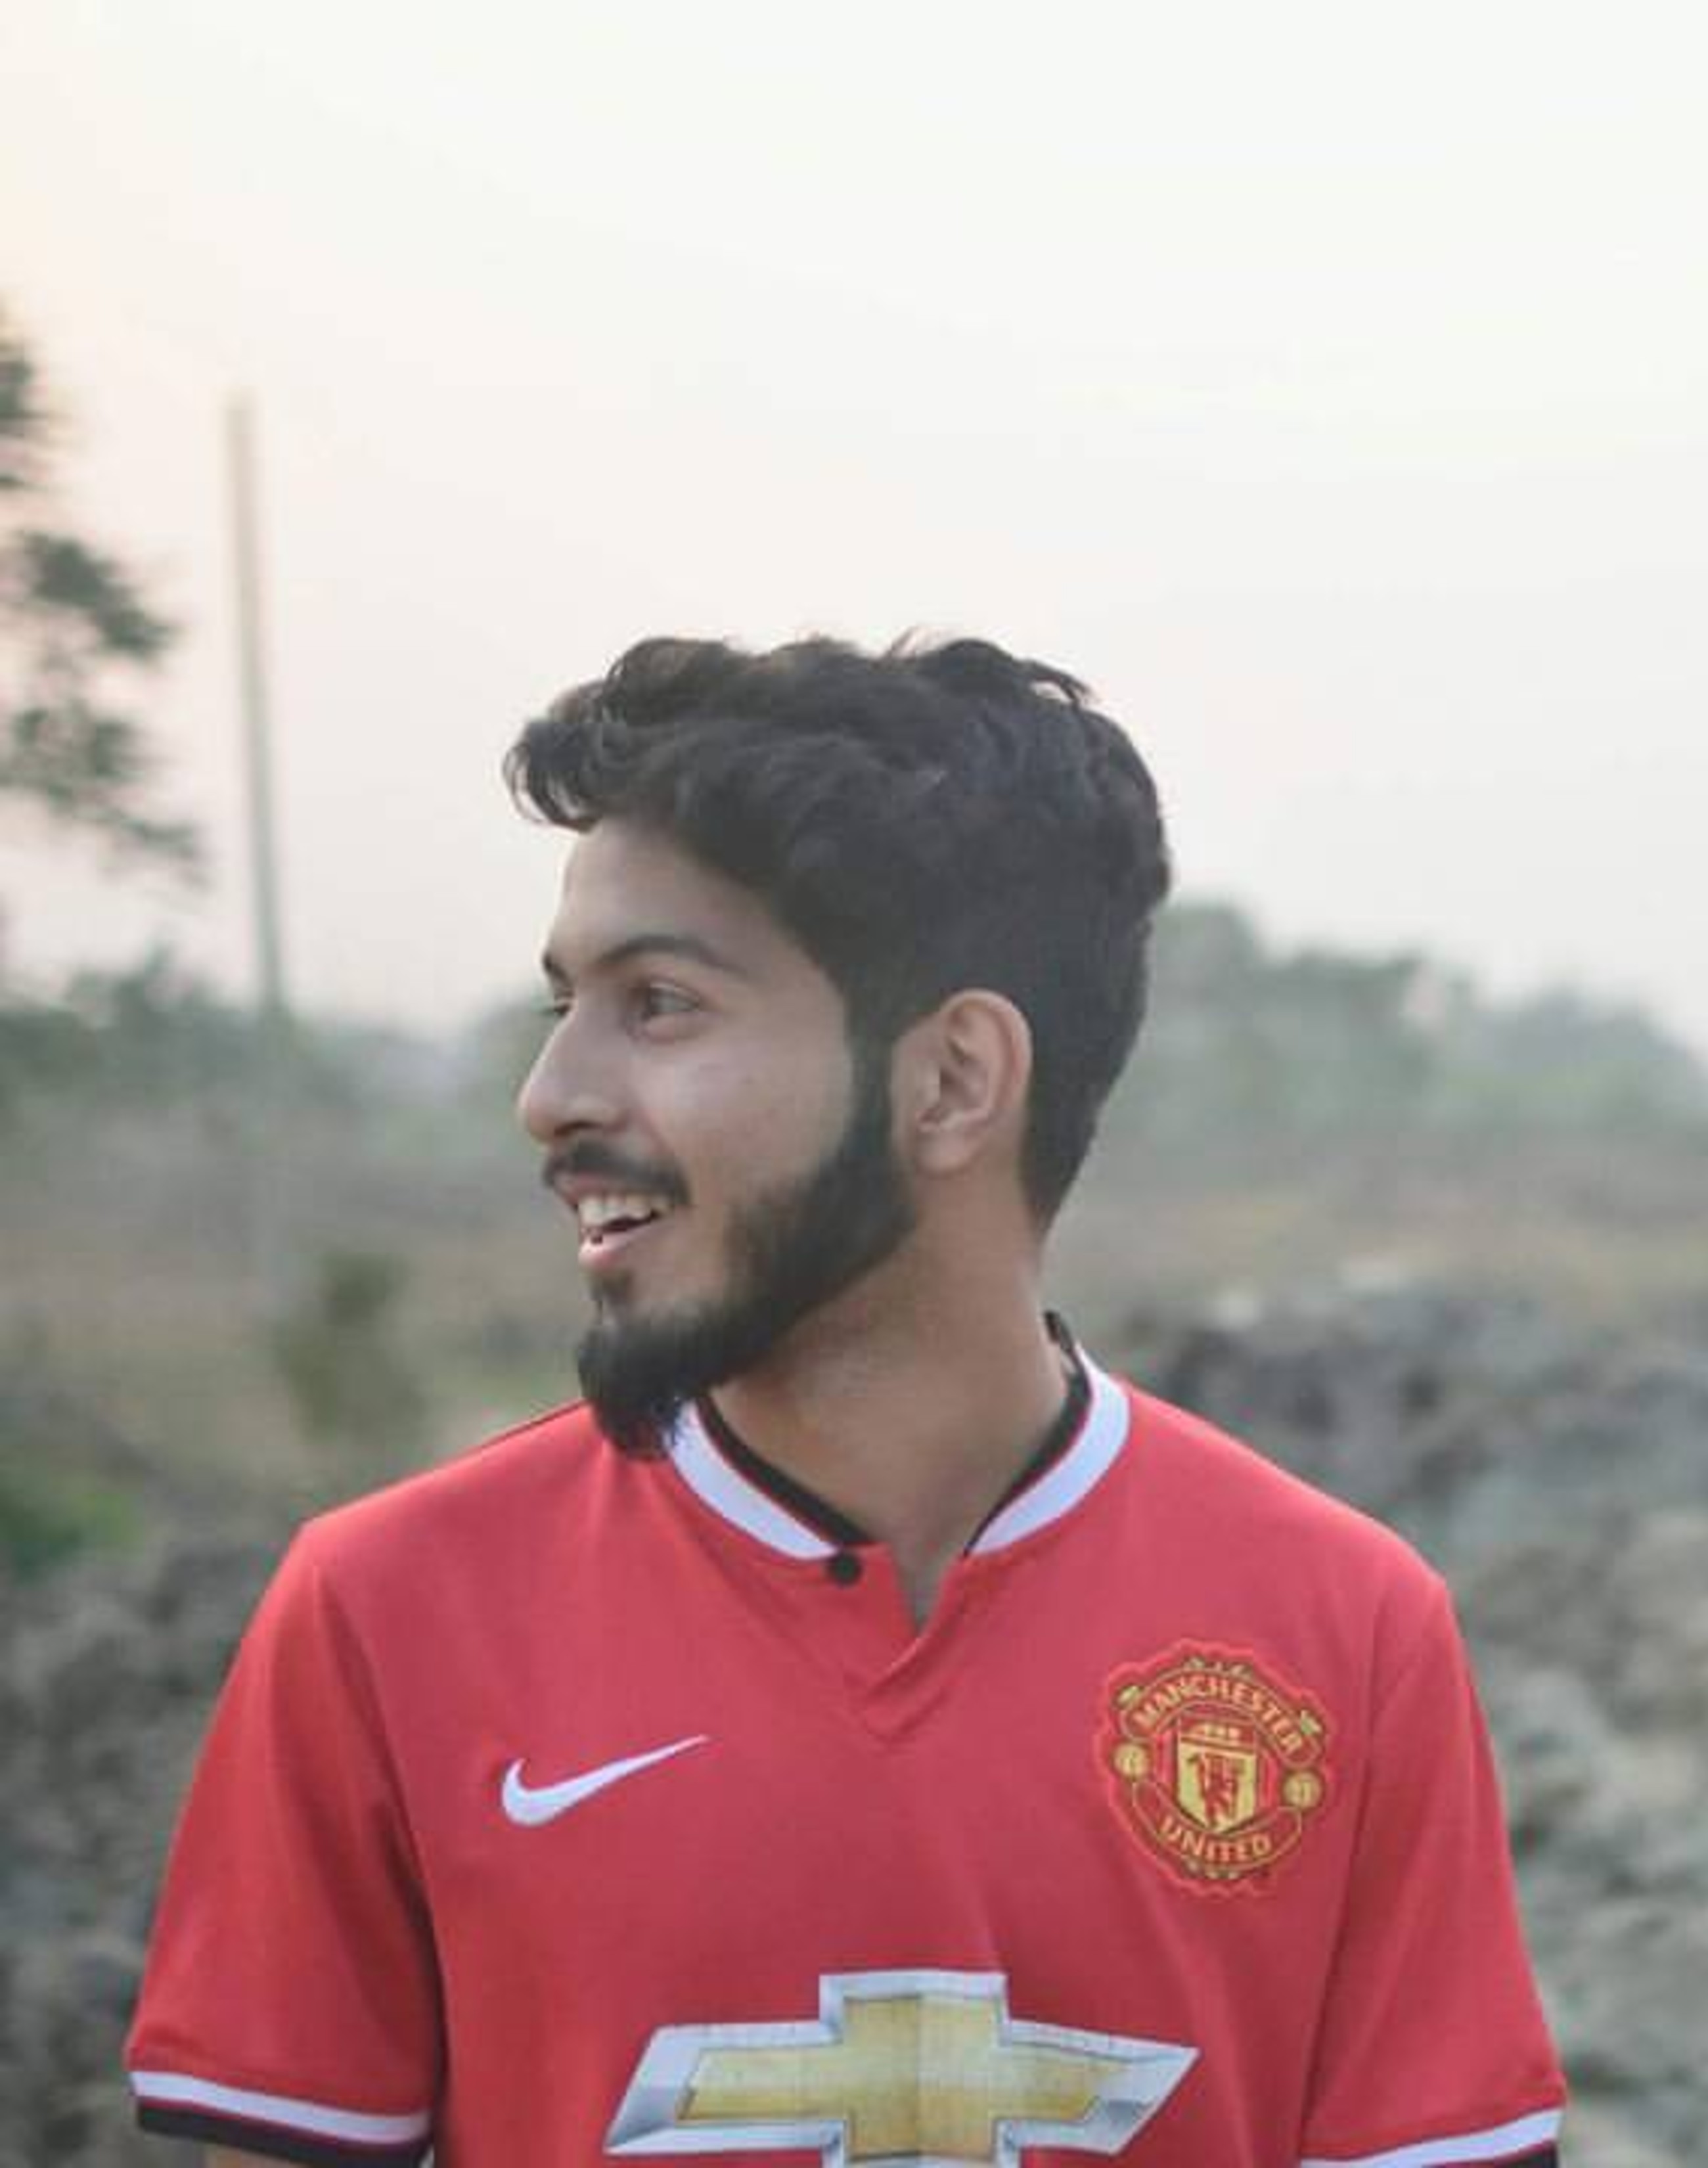 Abdullah wearing a Manchester United jersey